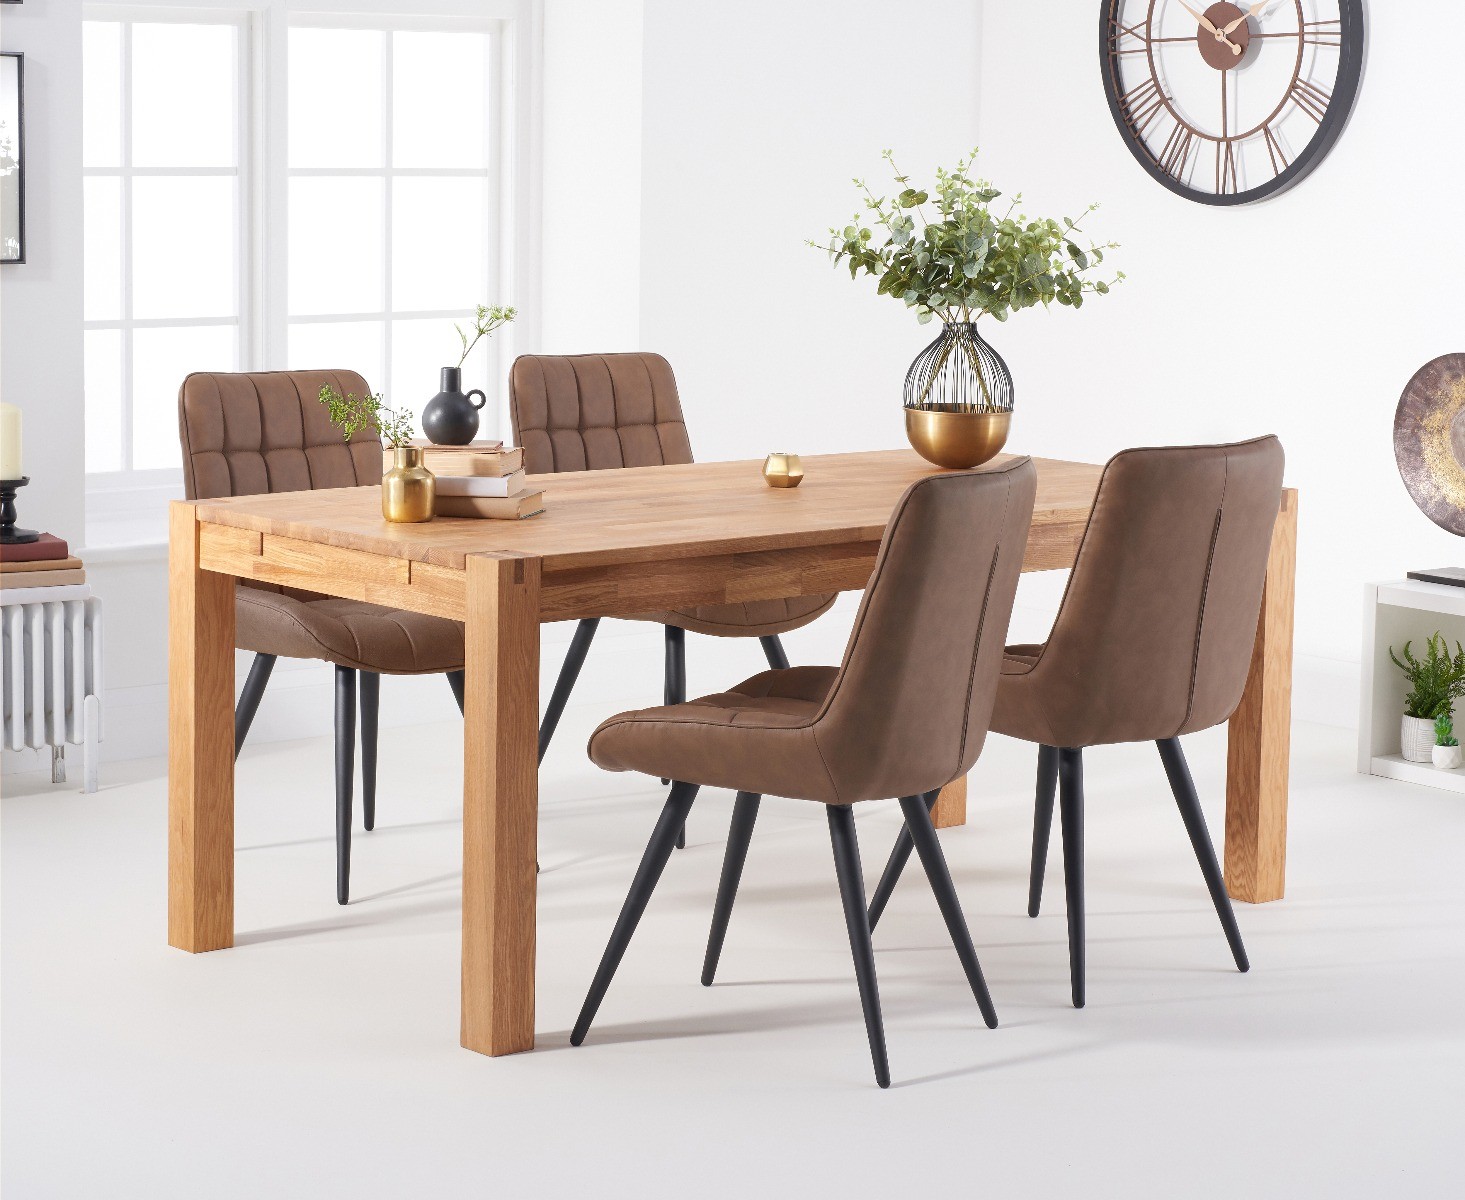 Thetford 180cm Oak Dining Table With 6 Grey Larson Chairs